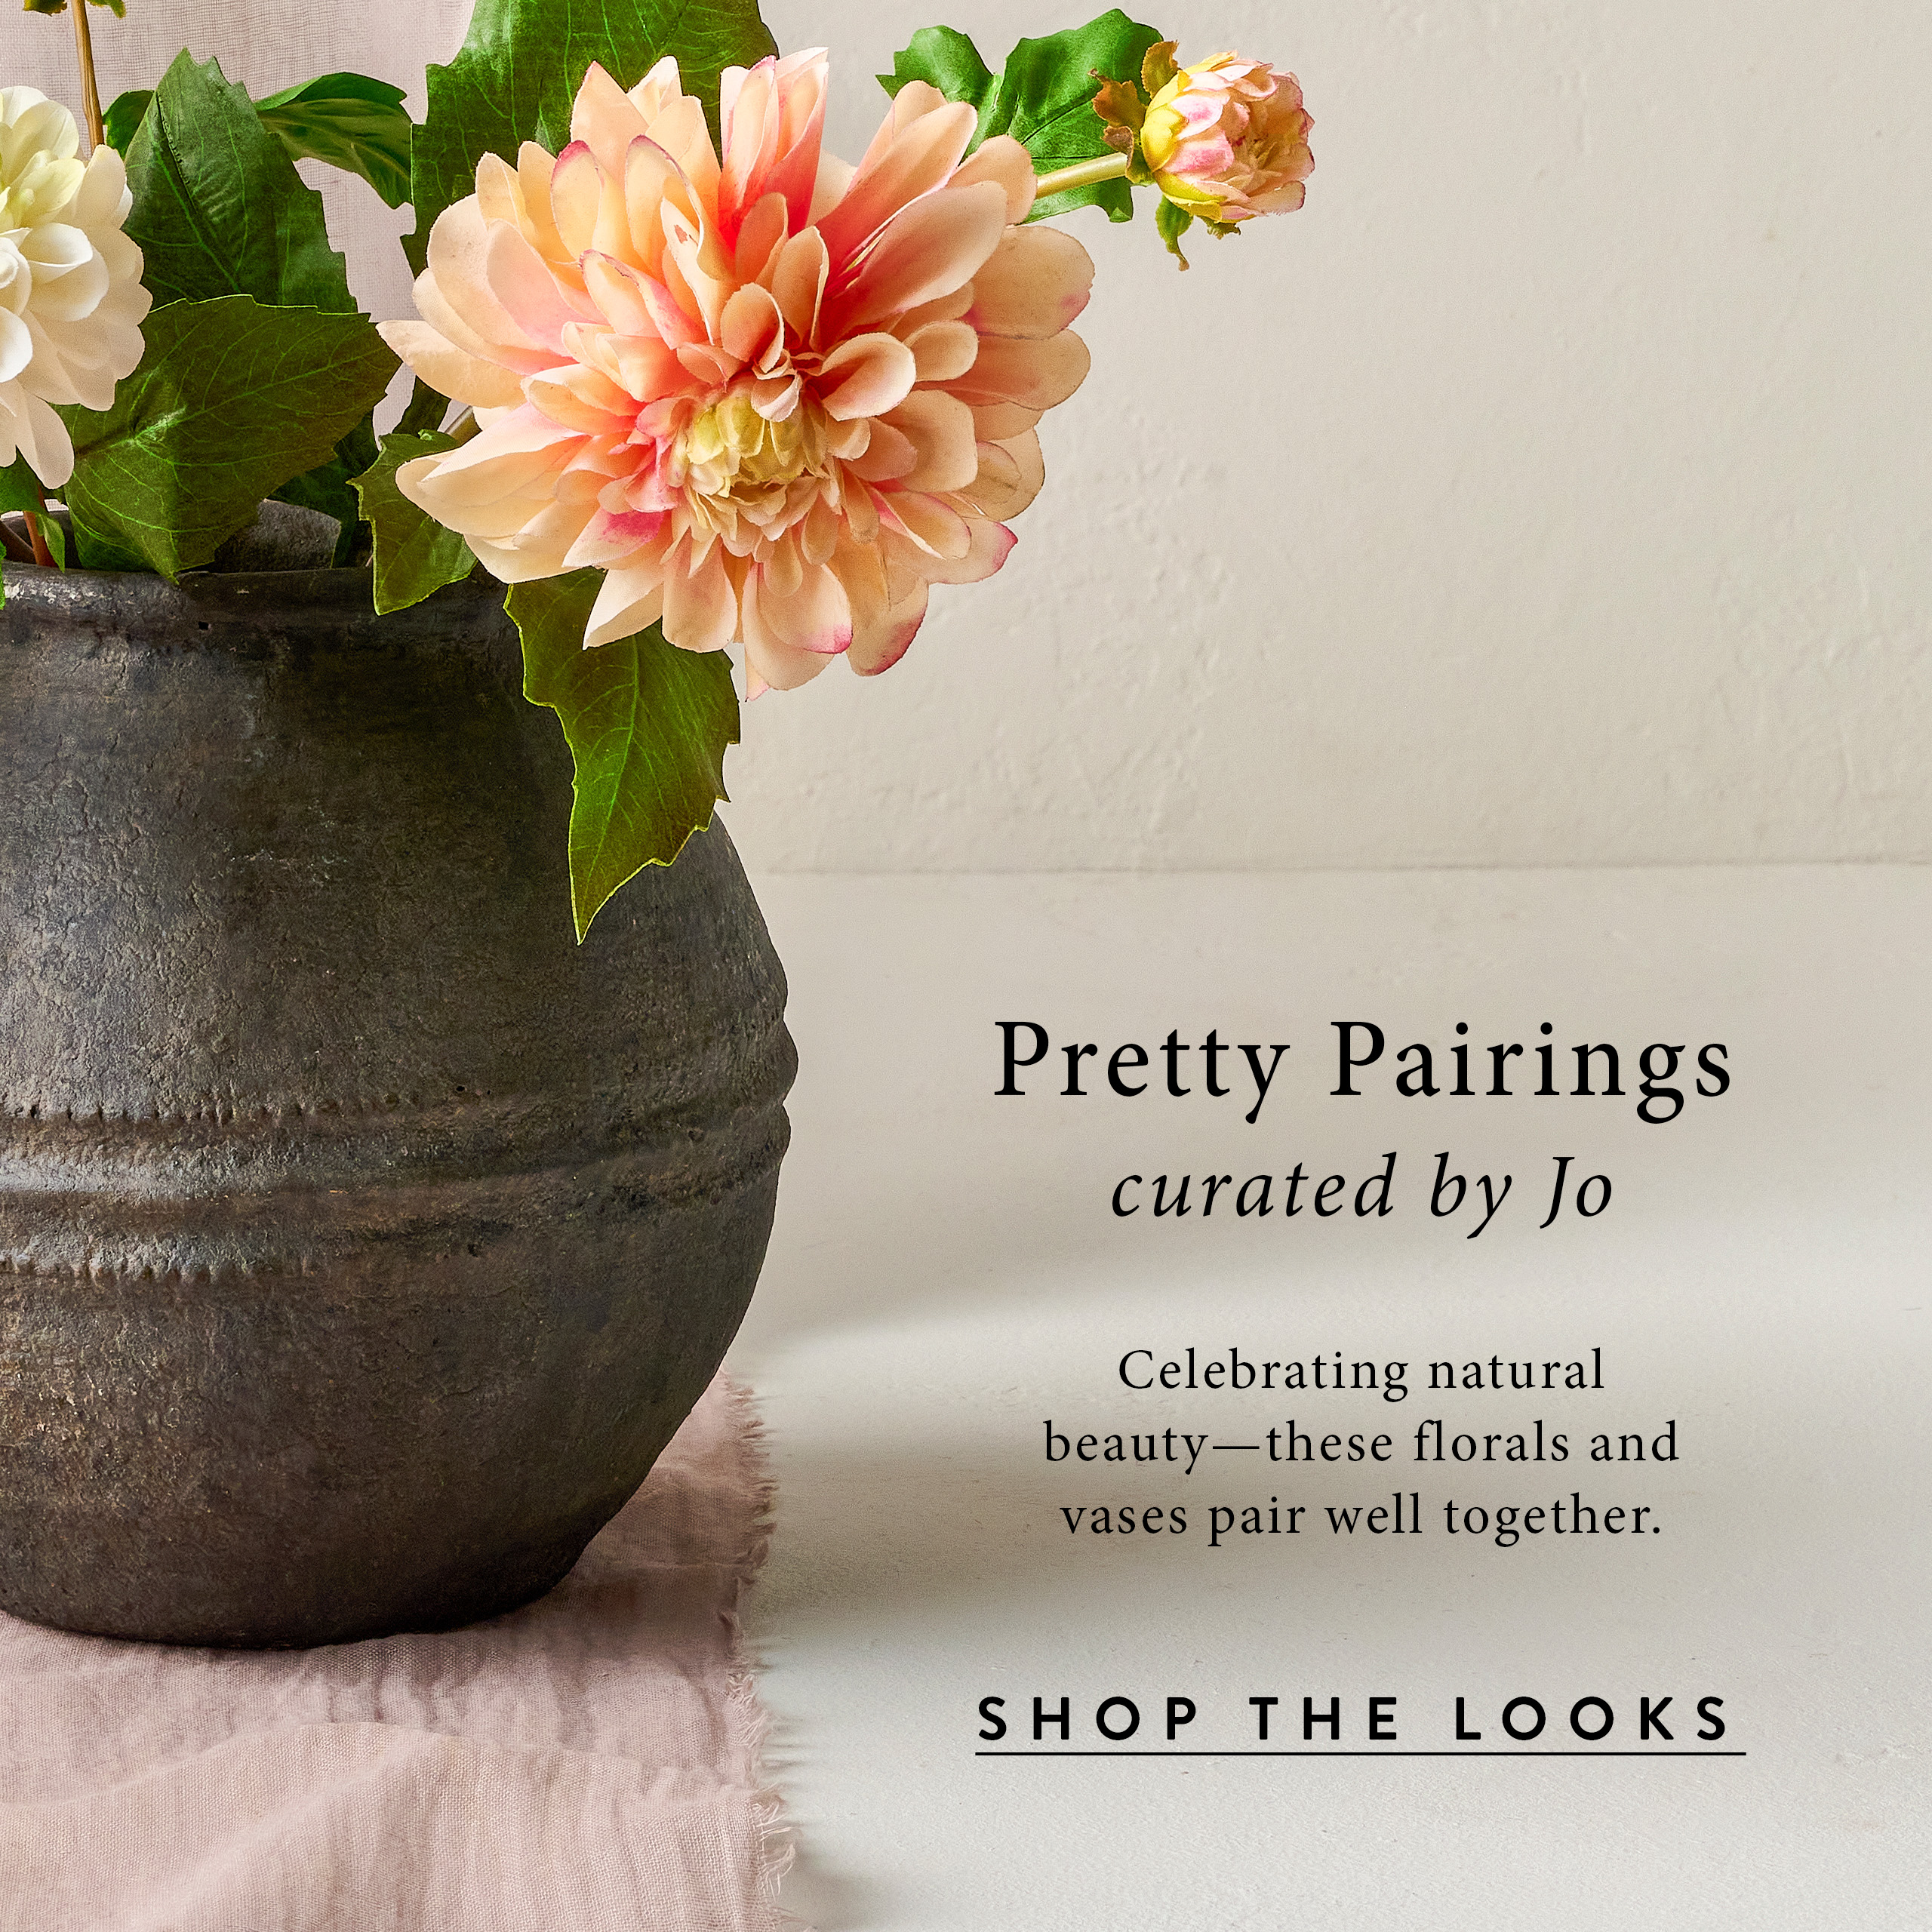 Pretty Pairings curated by Jo.  Celebrating natural beauty - these florals and vases pair well together.  shop the looks.